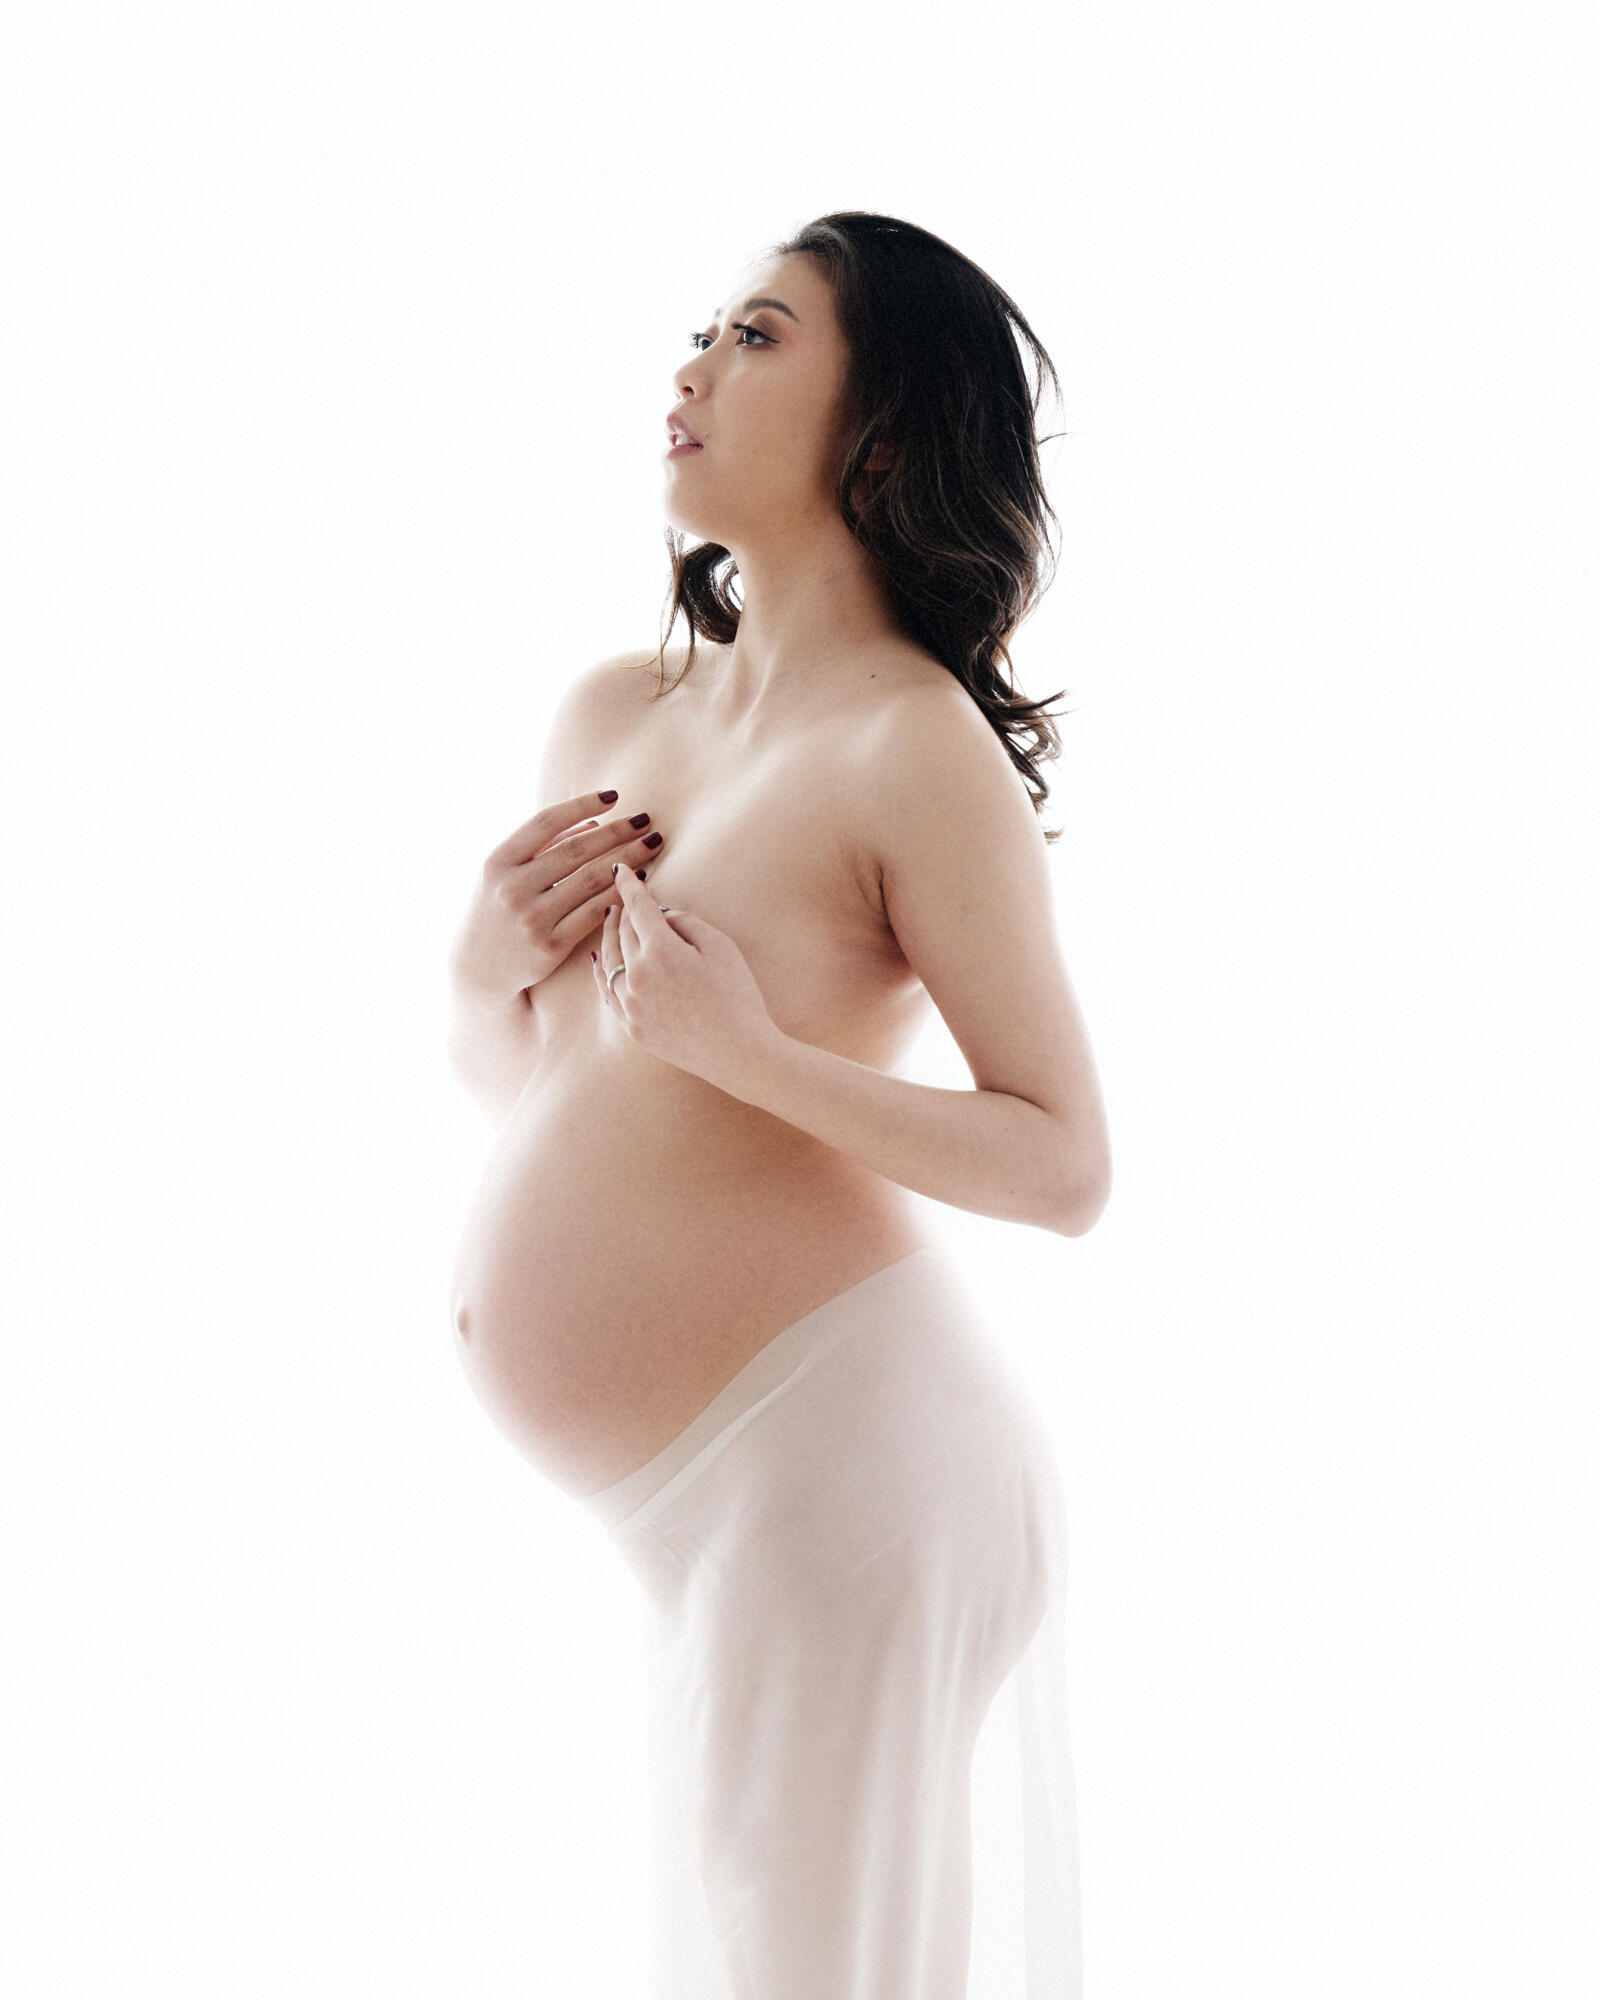 Chinese woman, maternity photoshoot draped in sheer fabric in Birmingham Tianna J-Williams Photography